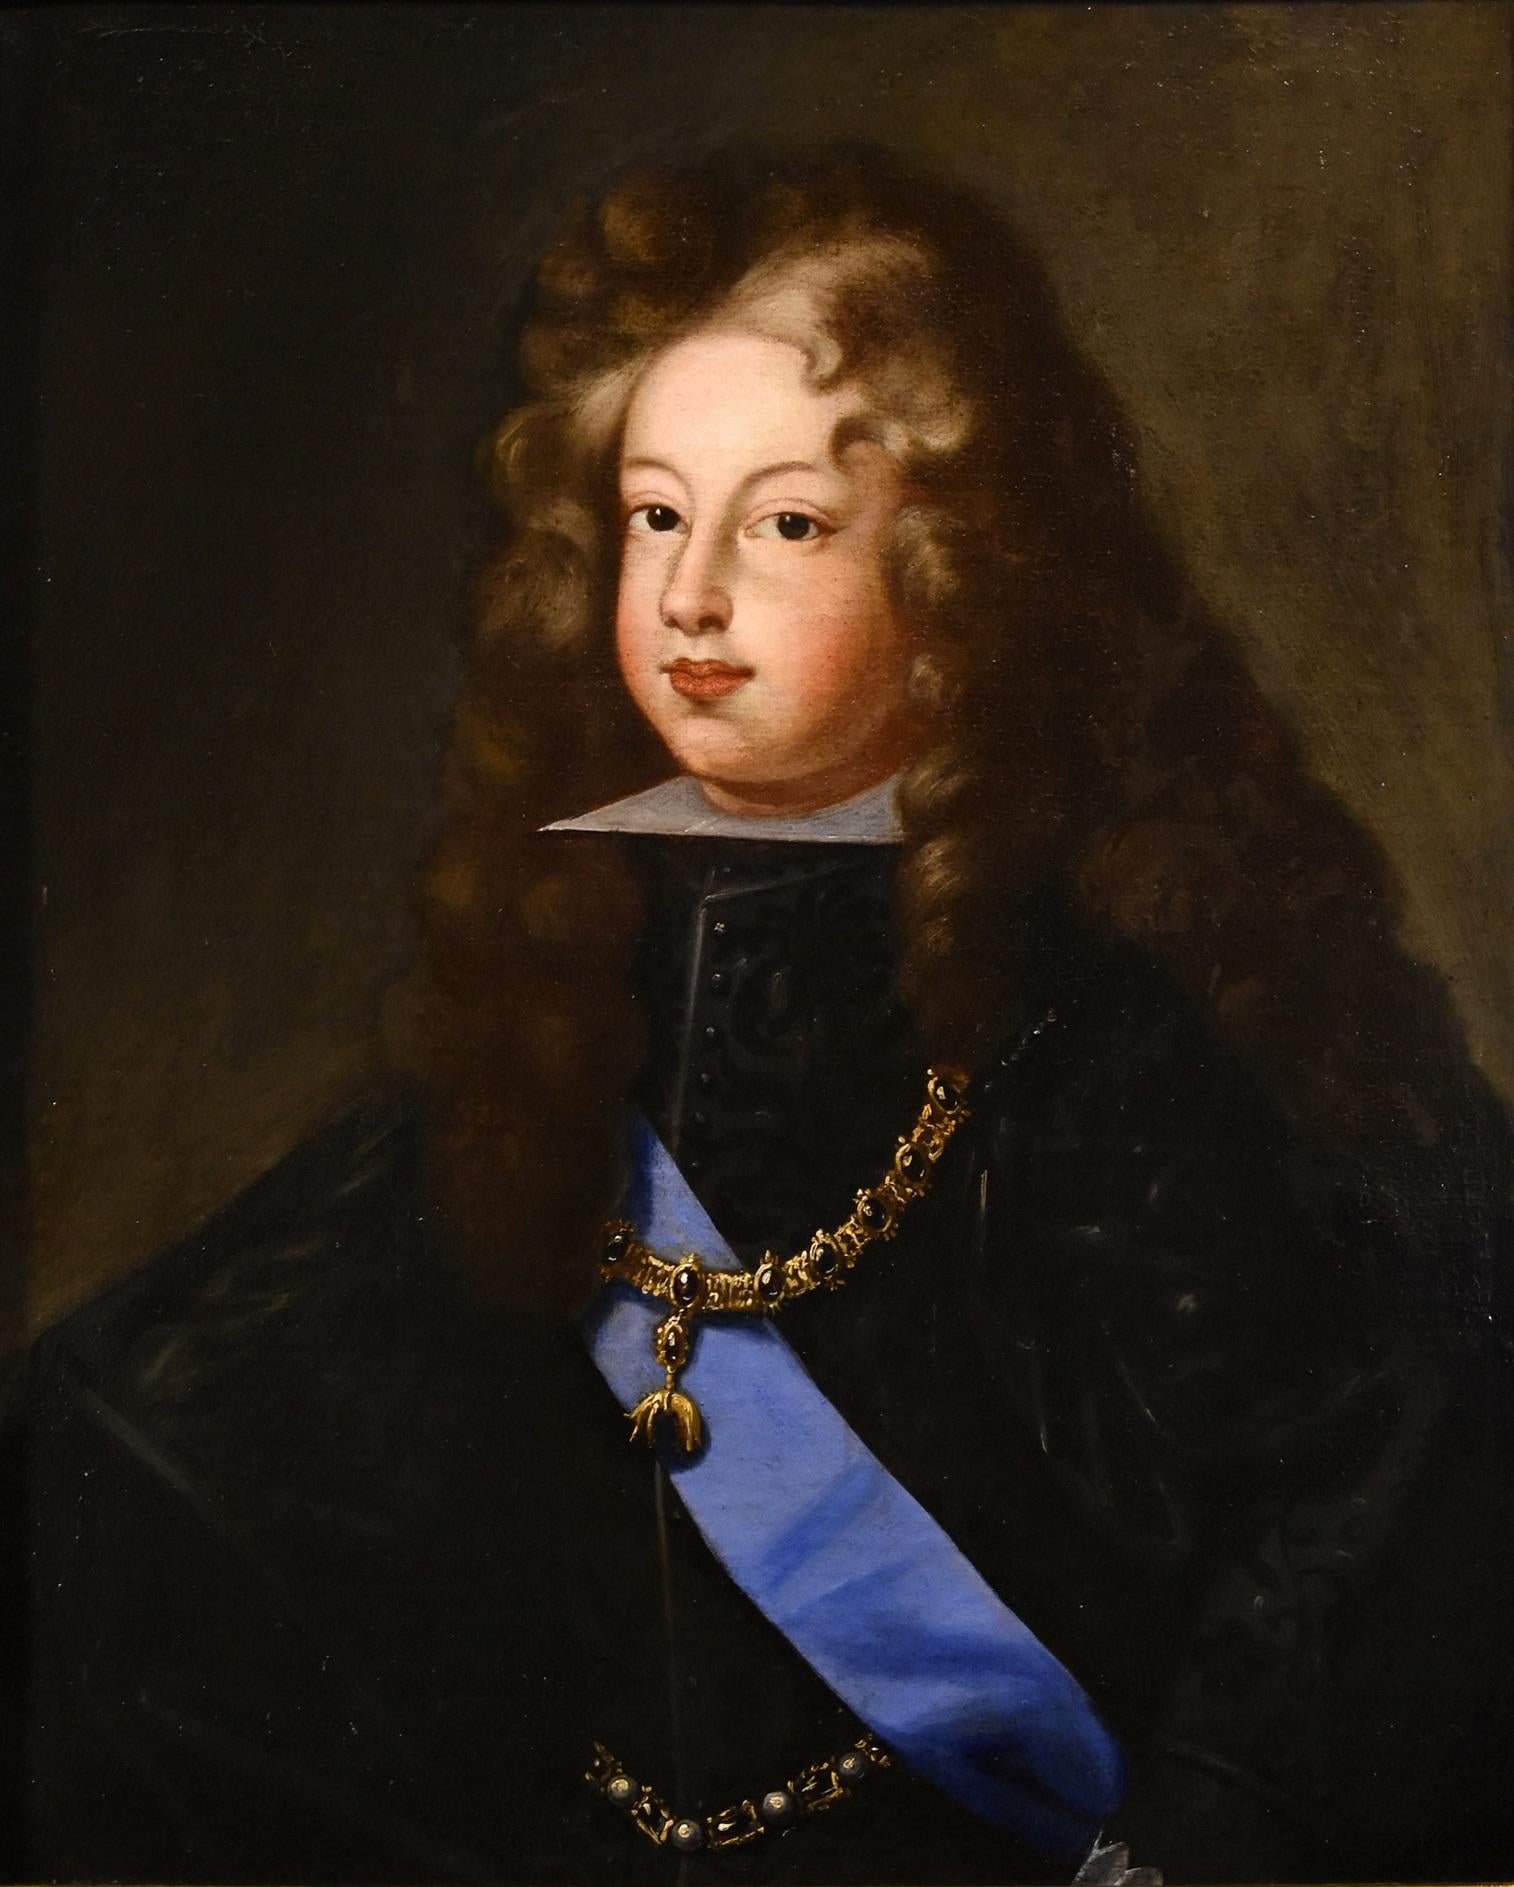 Portrait Philip V King Rigaud Paint Oil on canvas 17/18th Century Old master Art - Painting by Hyacinthe Rigaud (Perpignan 1659 - Paris 1743) Circle